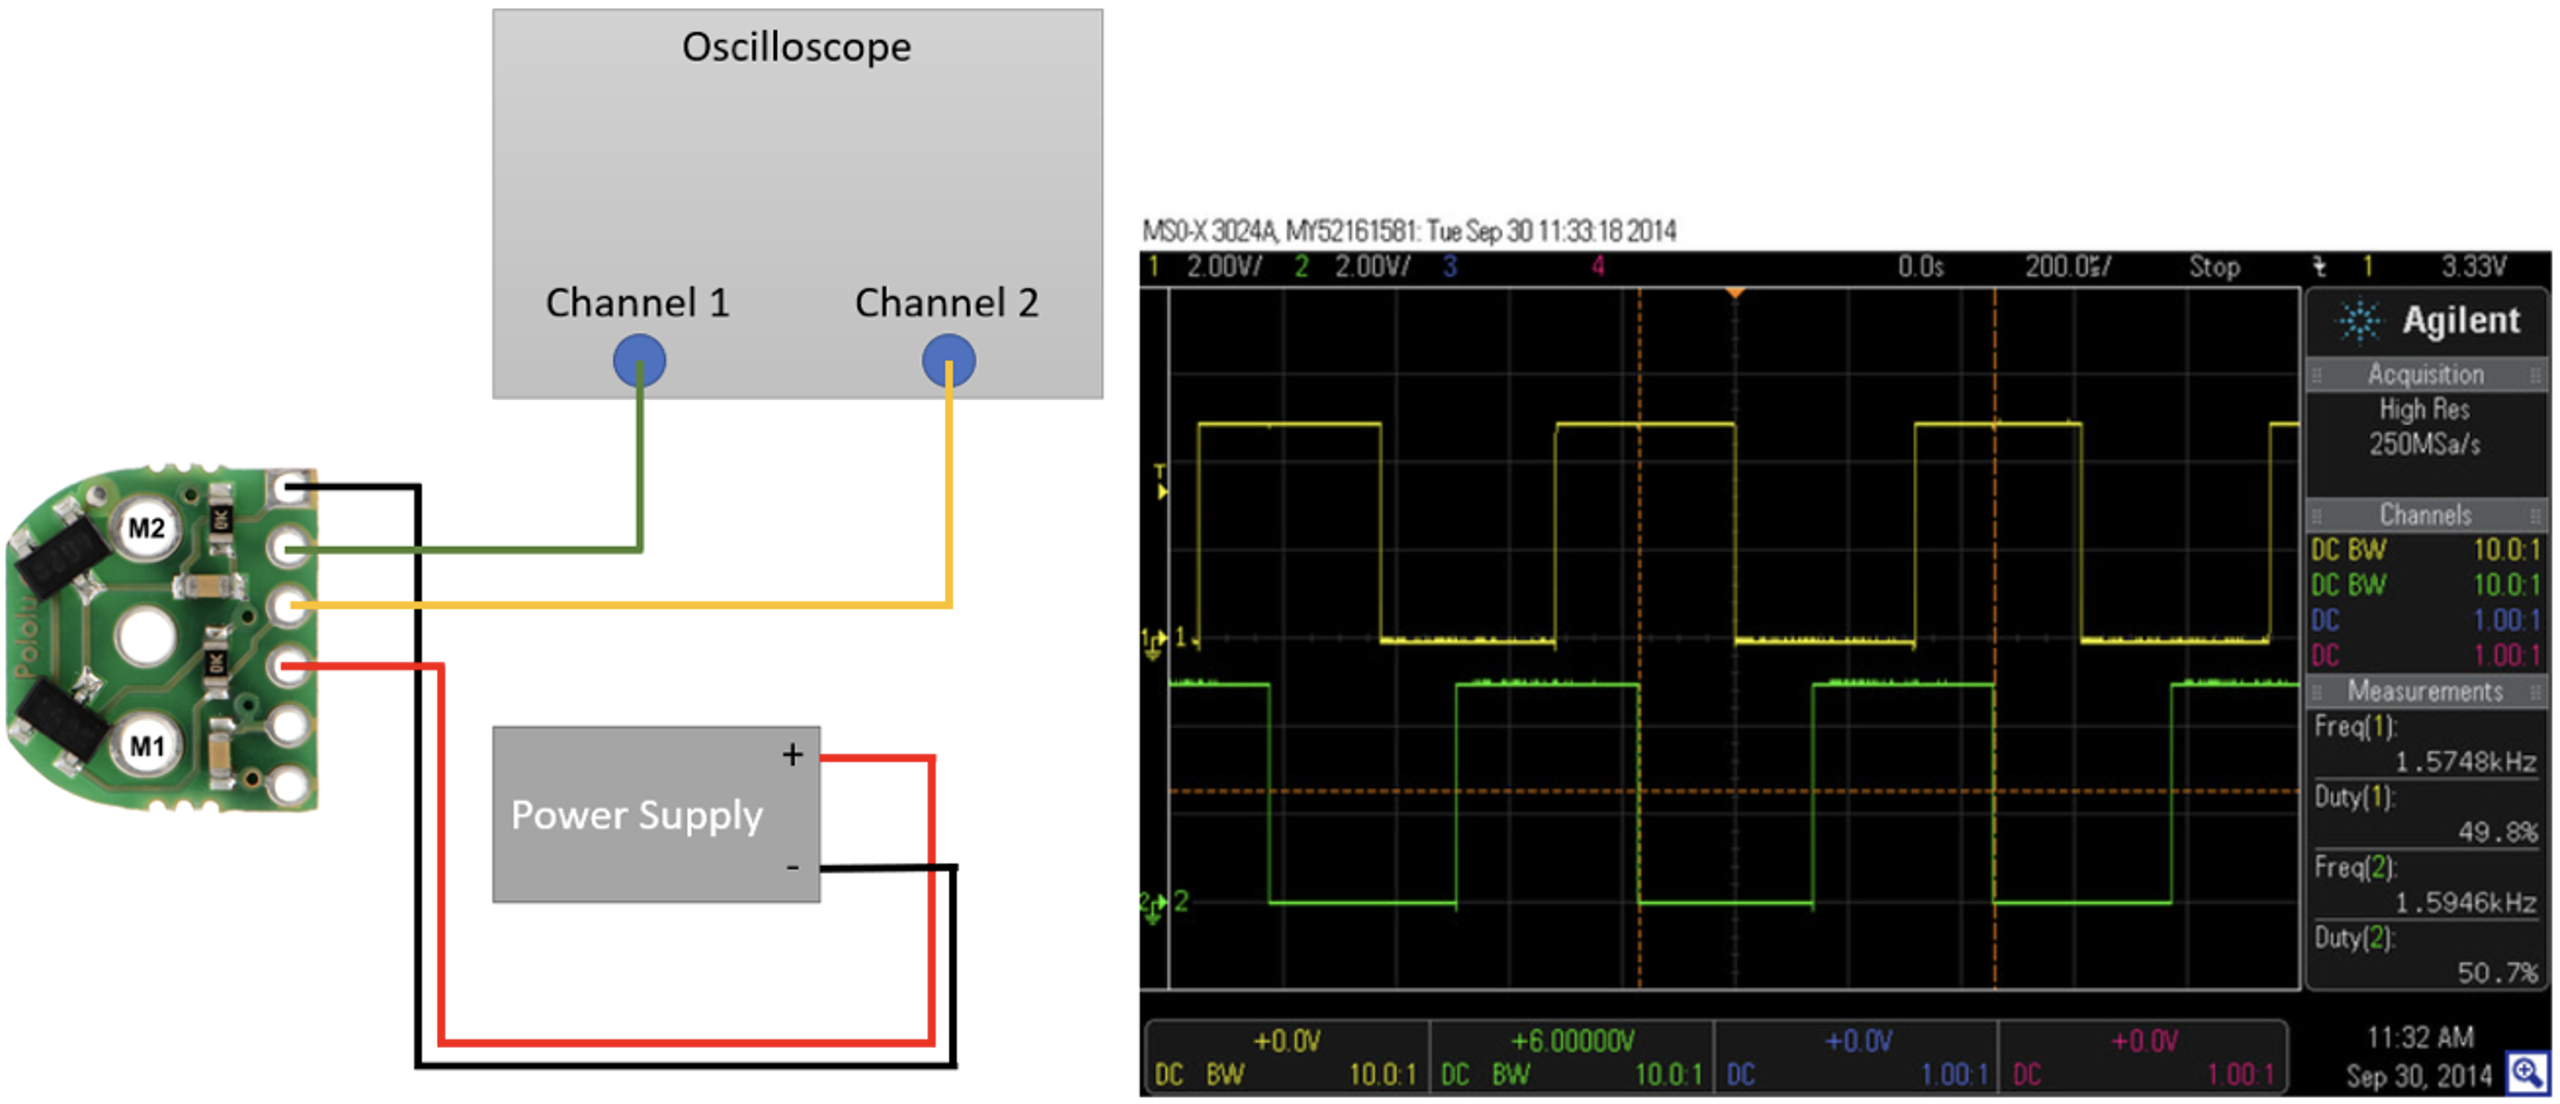 Encoder Connection Diagram and Associated Oscilloscope Output.